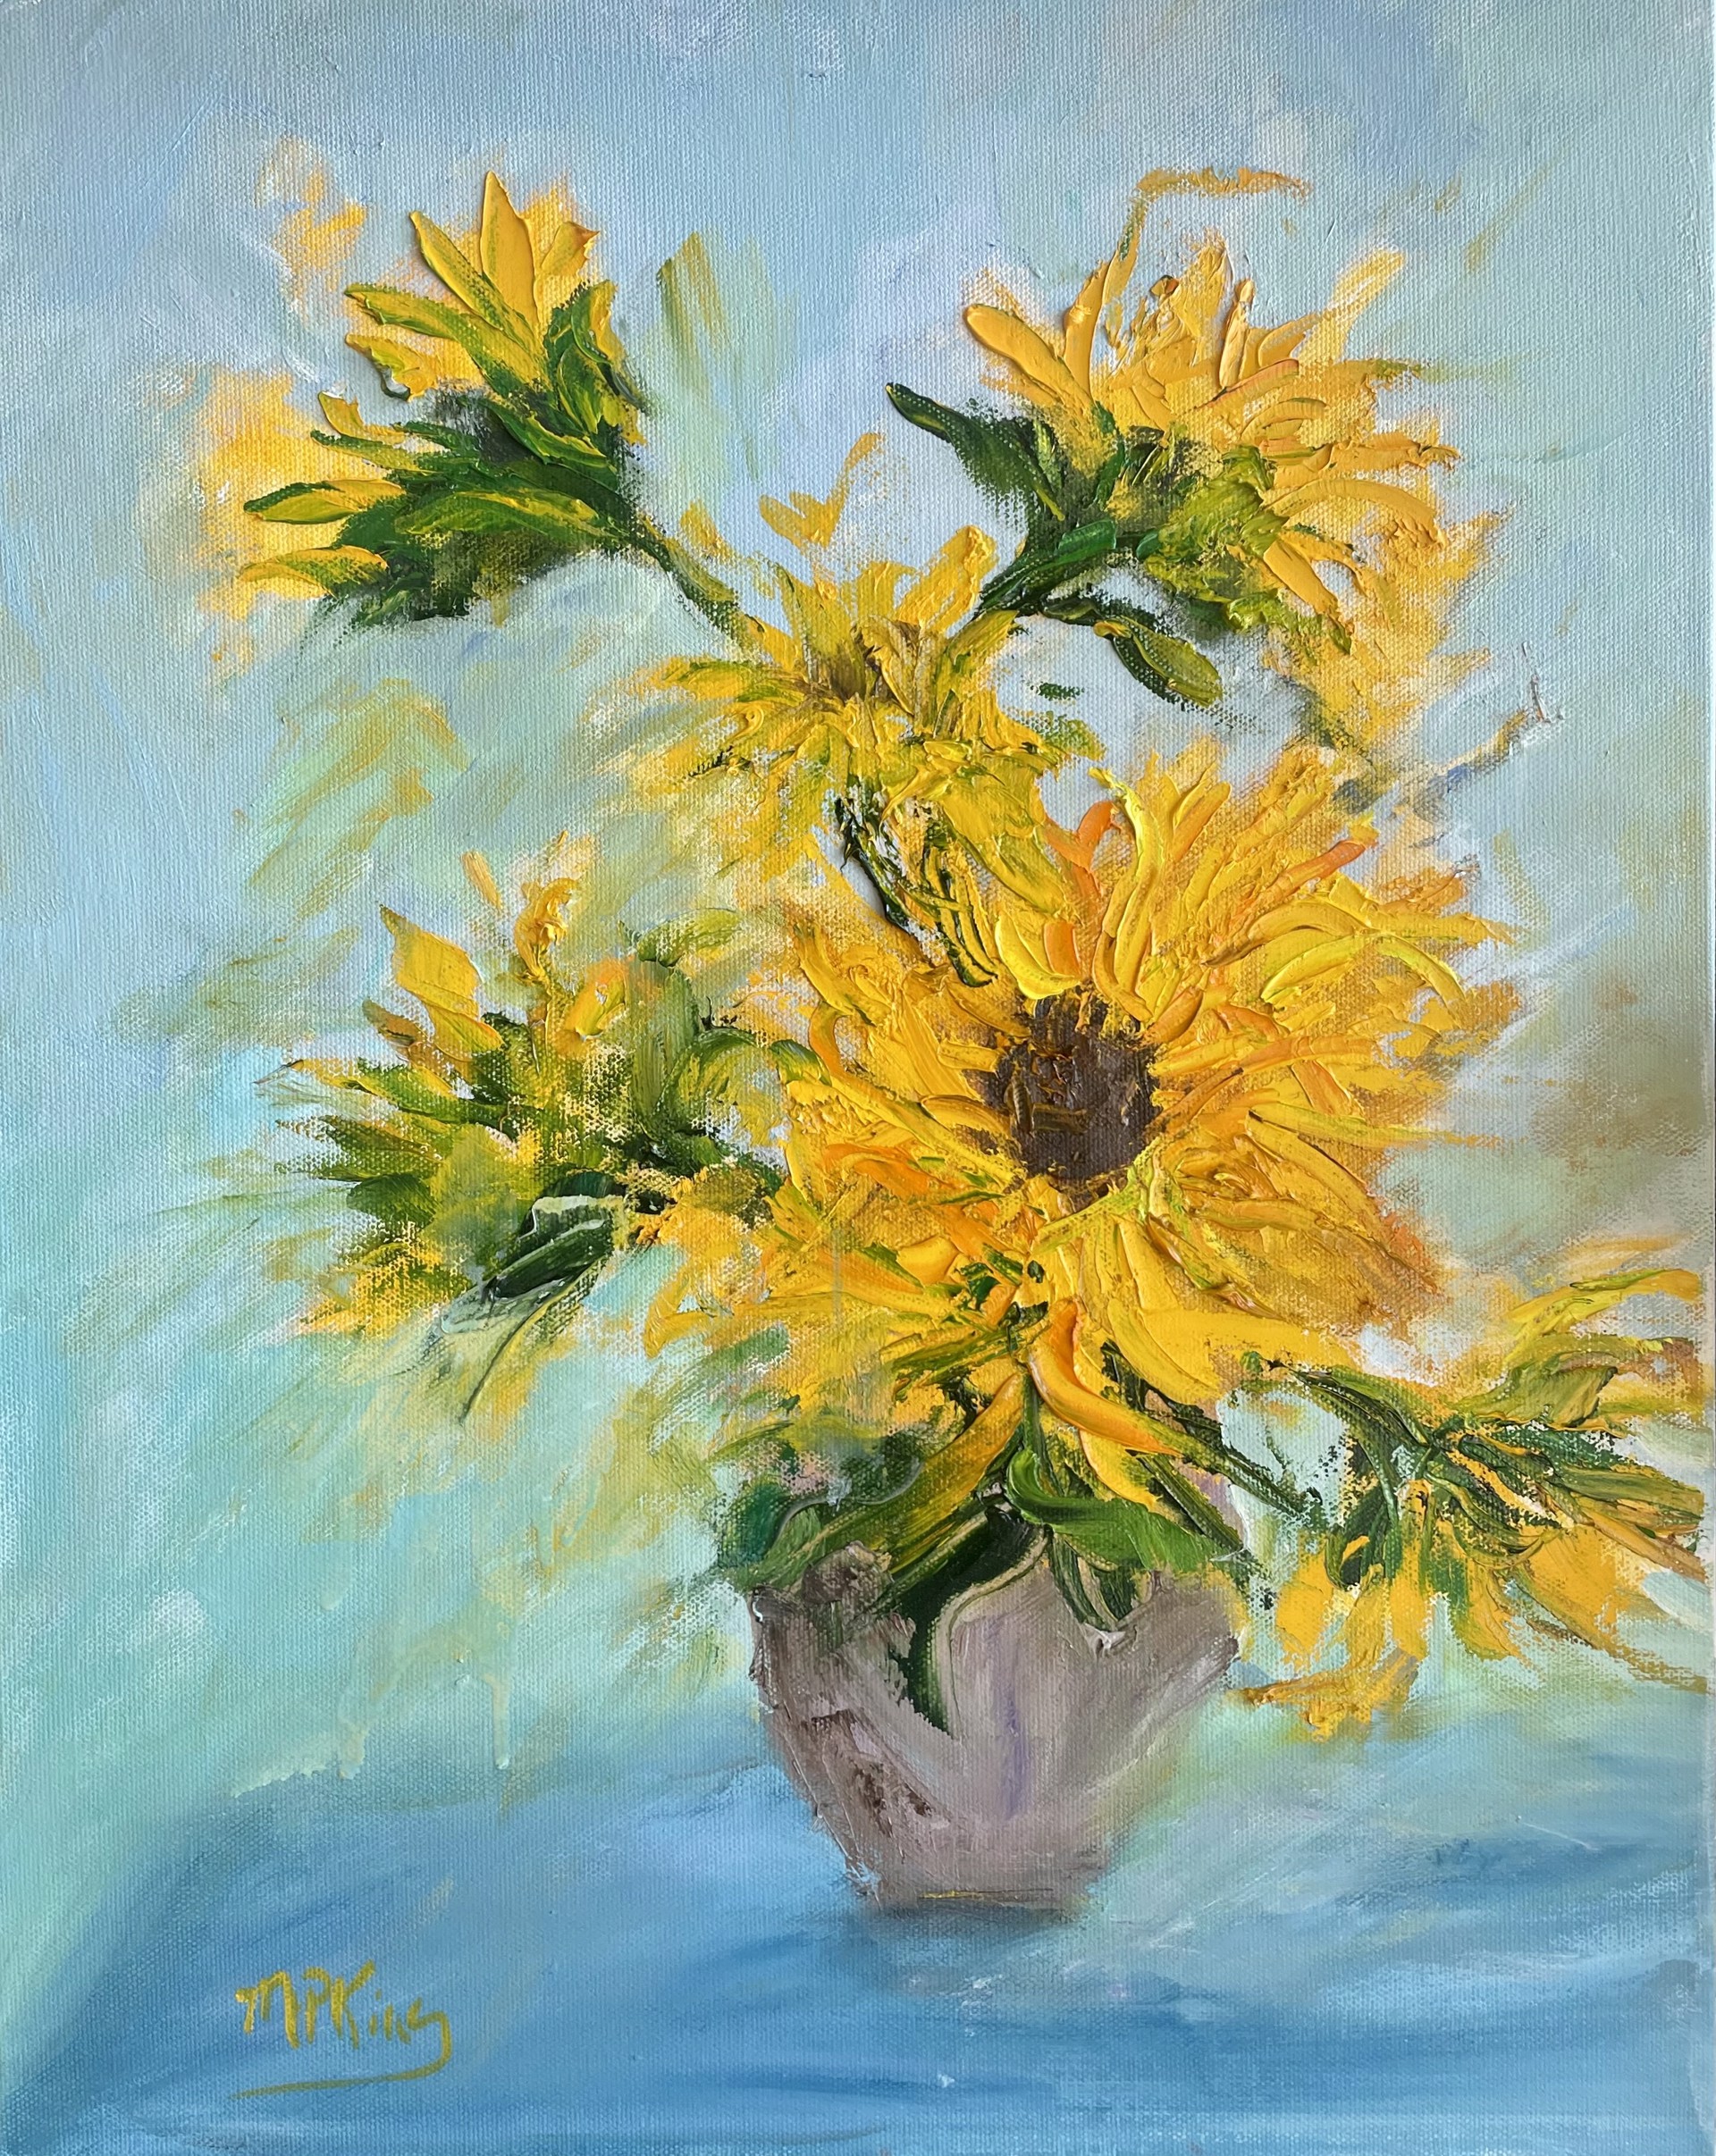 Sunflowers by Mary Pat King